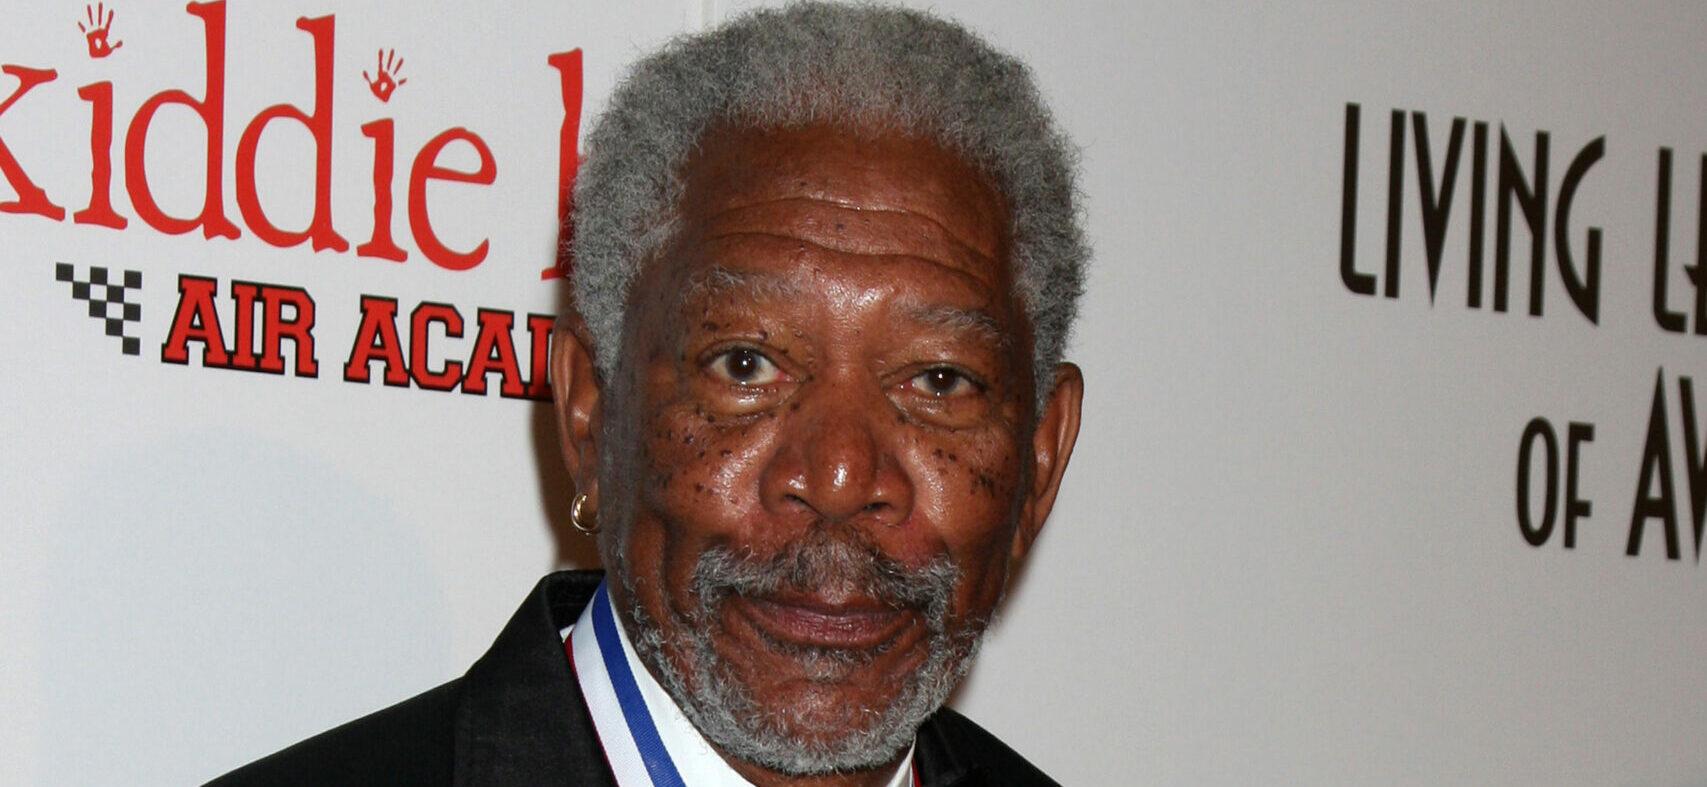 Morgan Freeman at the 9th Annual Living Legends of Aviation Awards at the Beverly Hilton Hotel on January 20, 2012 in Beverly Hills, CA